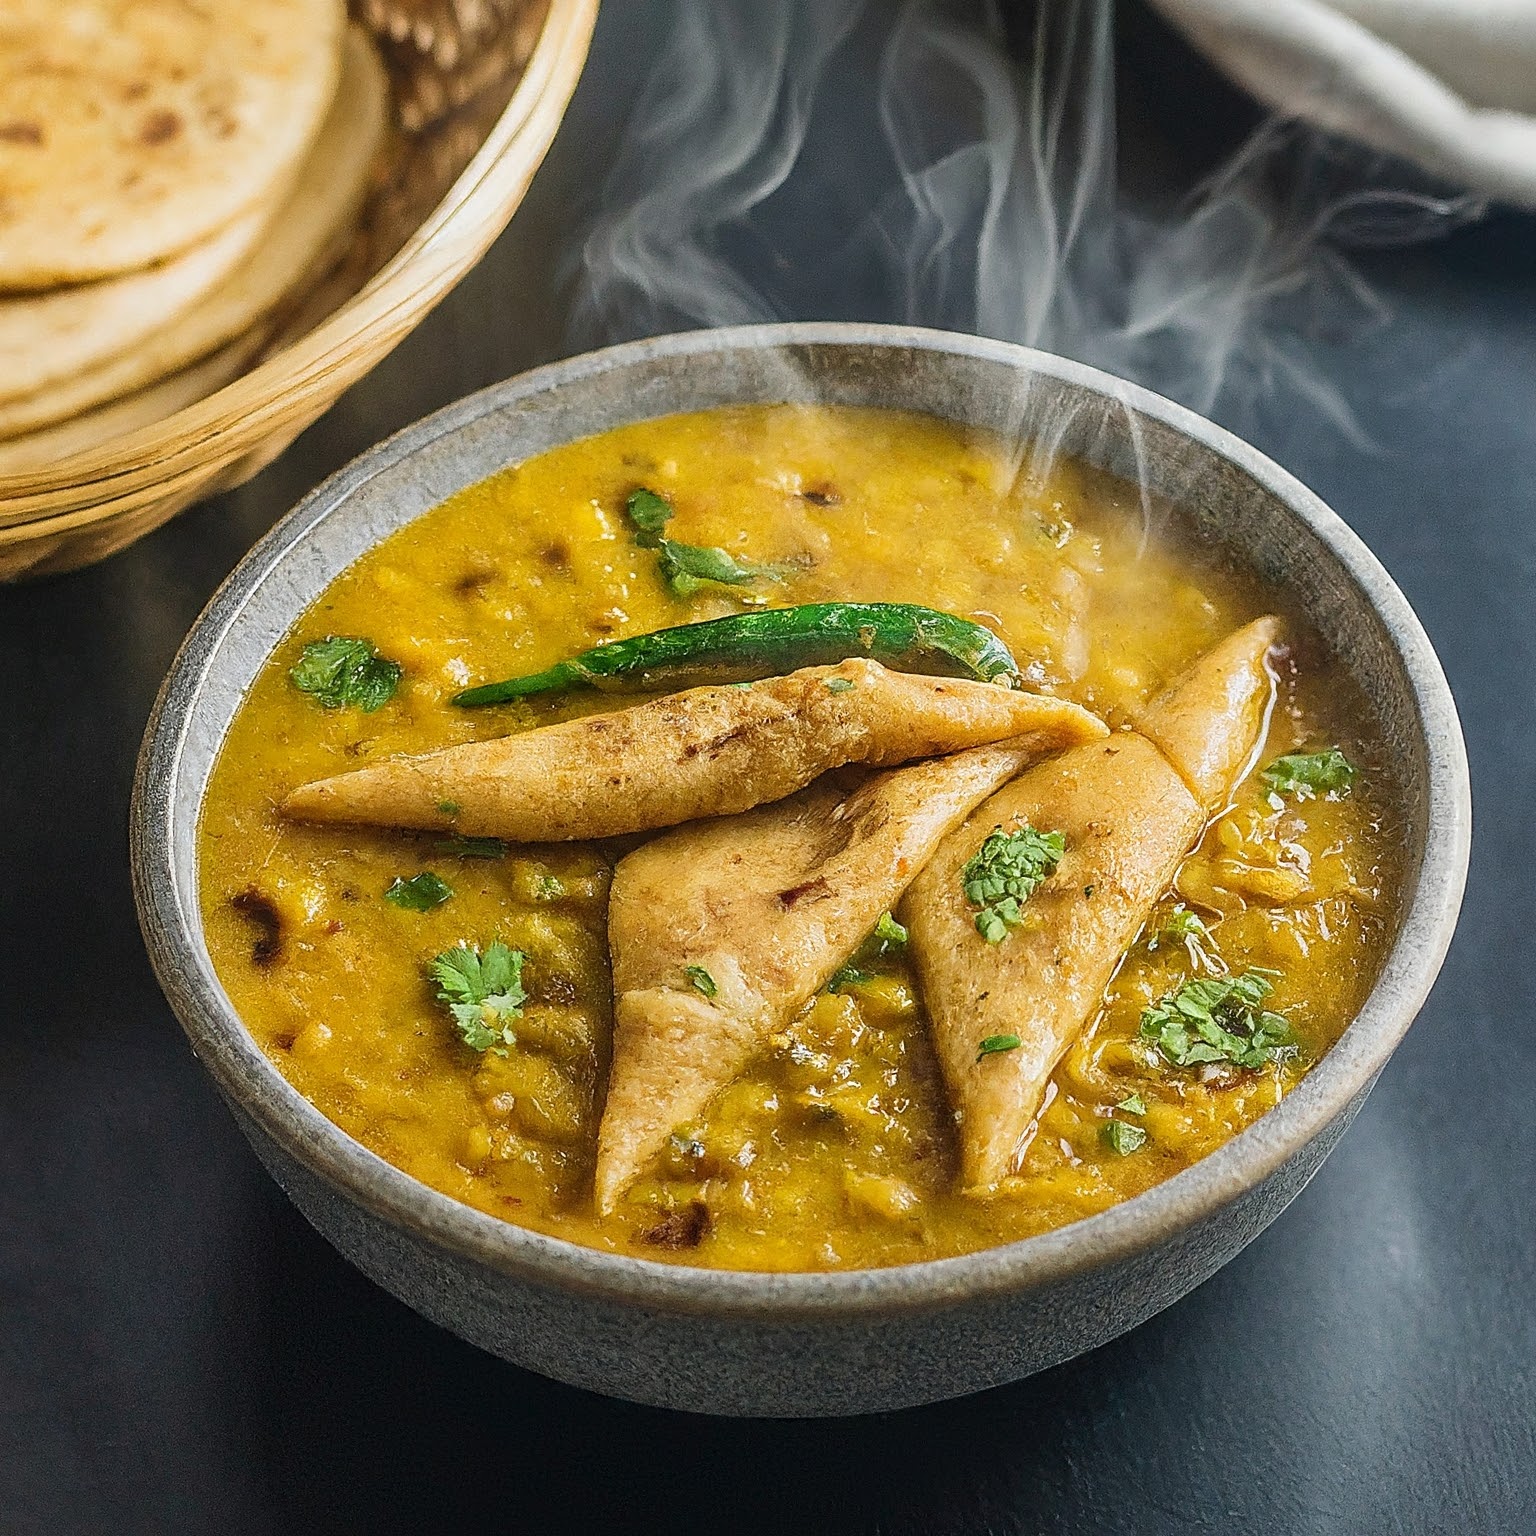 A steaming bowl of Dal Dhokli, a flavorful Gujarati dish with lentil stew and dumplings.